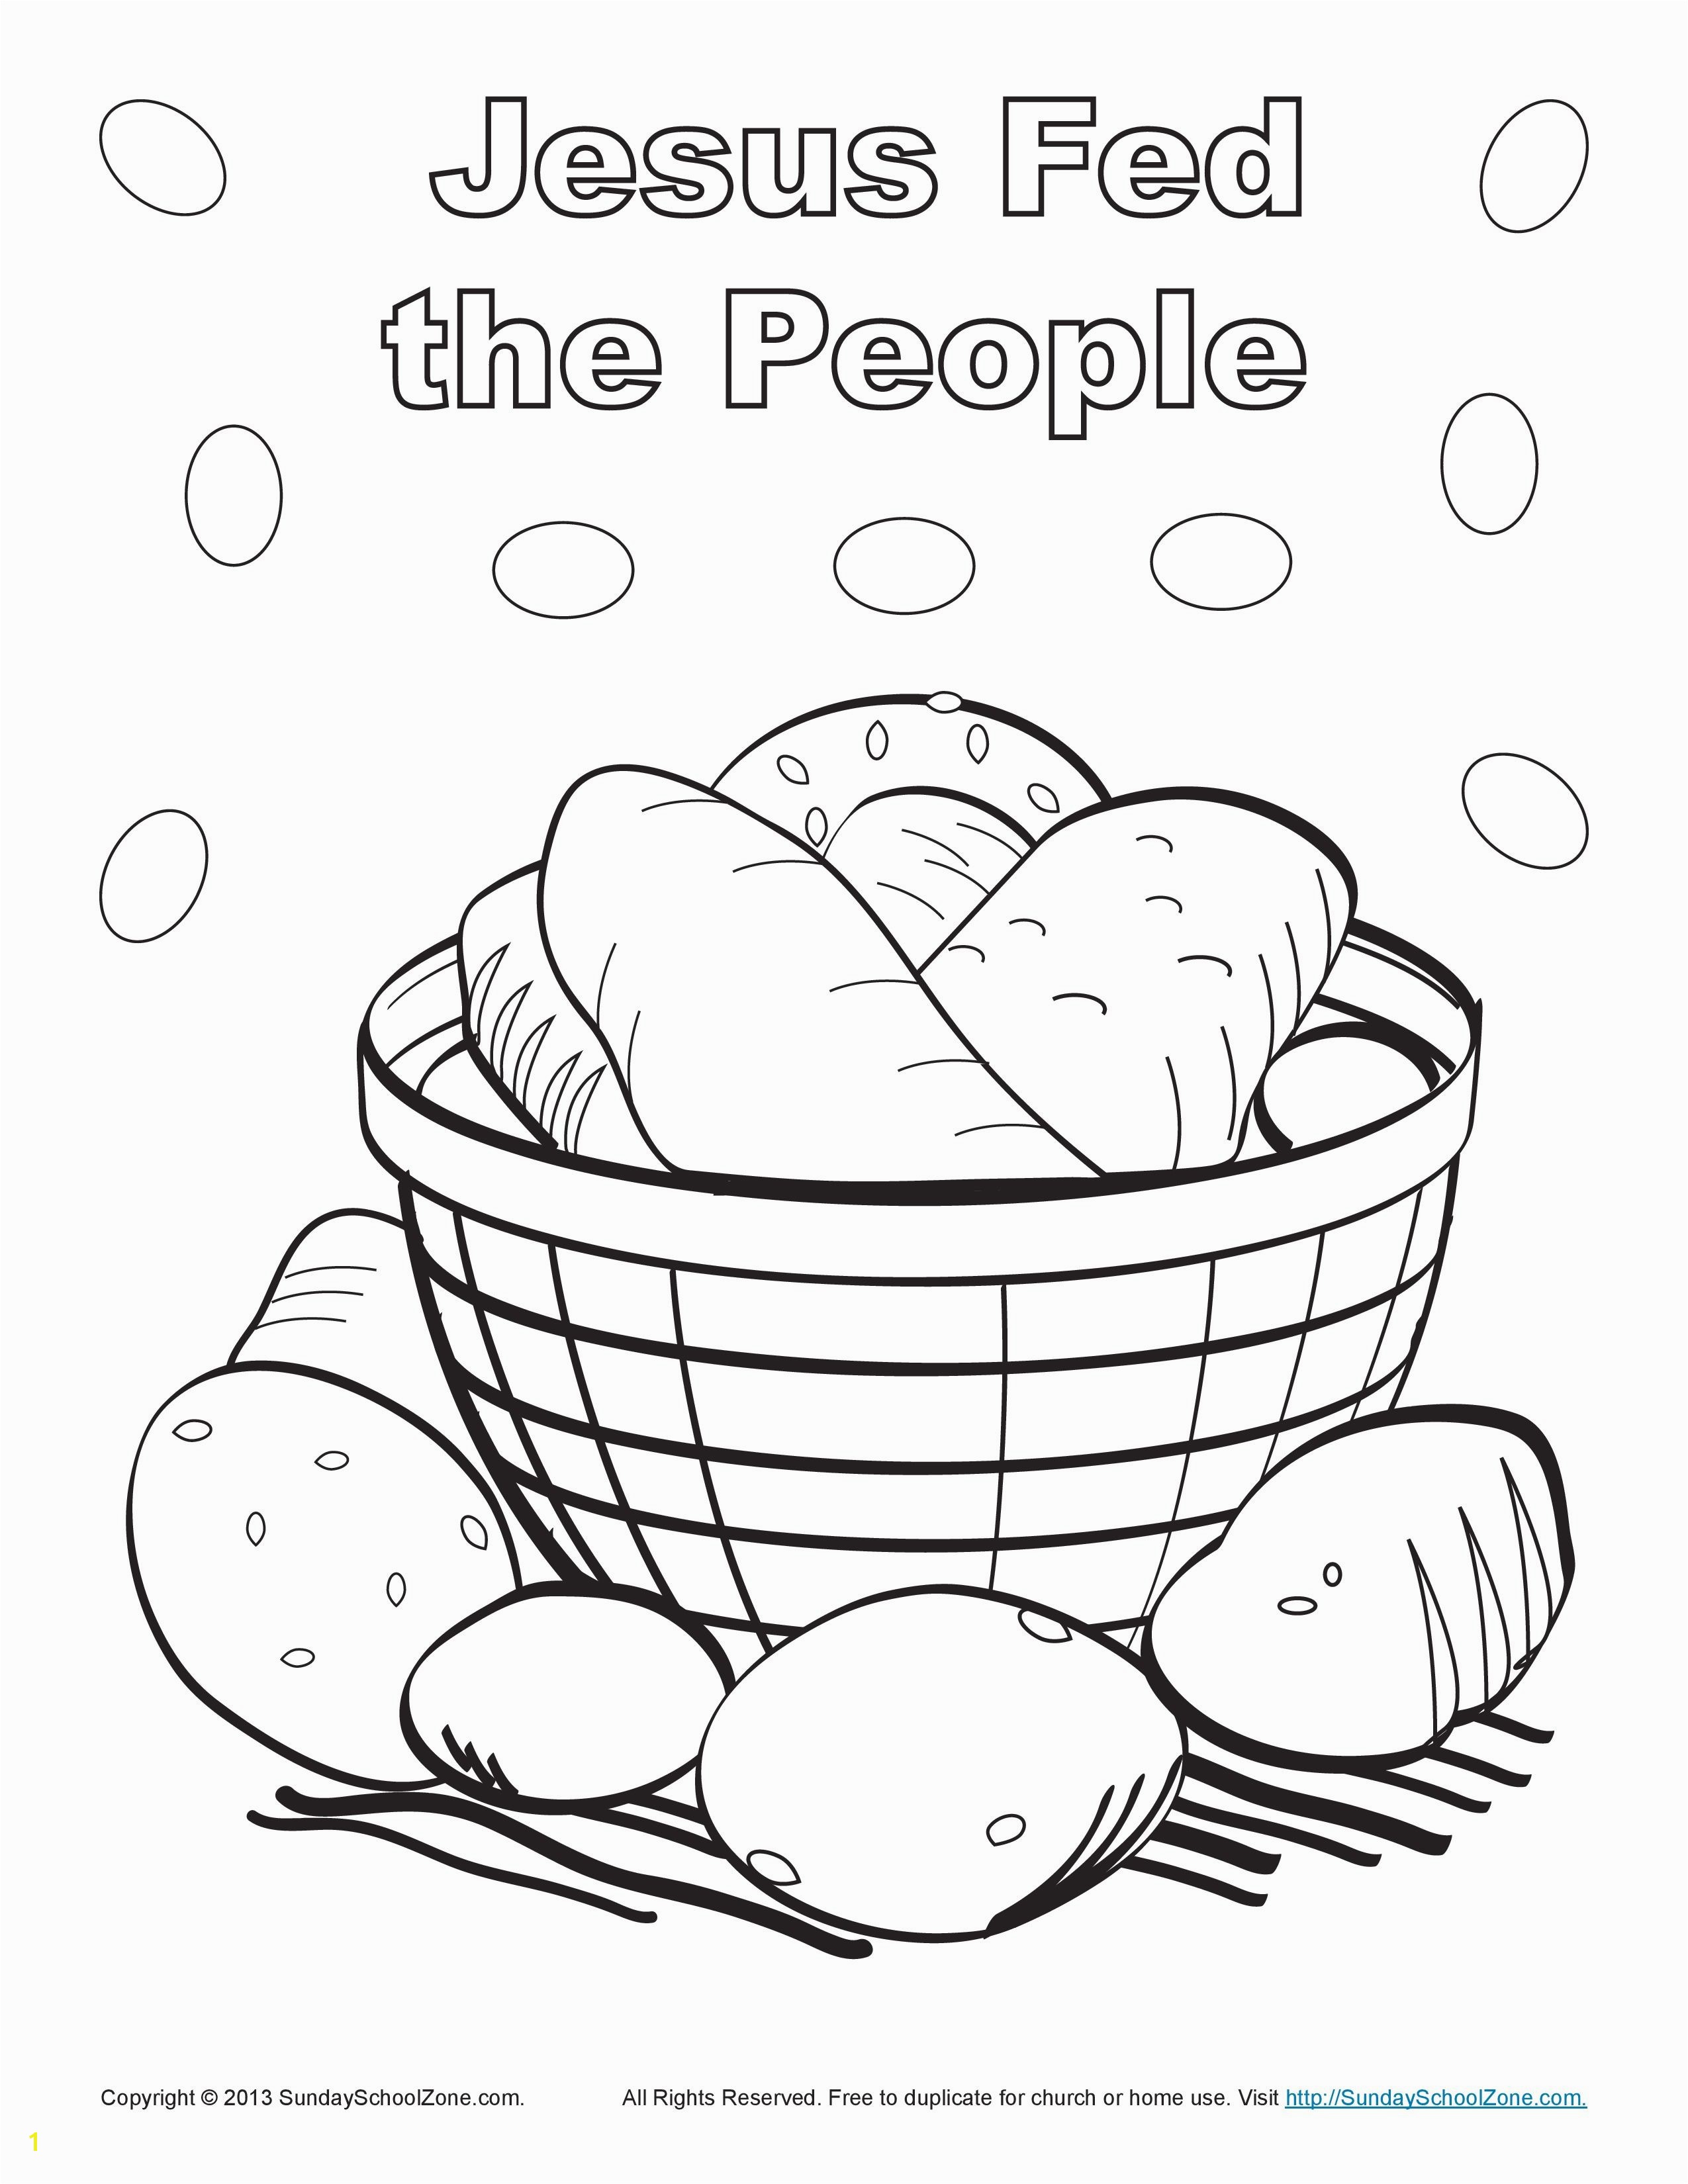 Feed My Sheep Coloring Page Bible Coloring Page for Kids